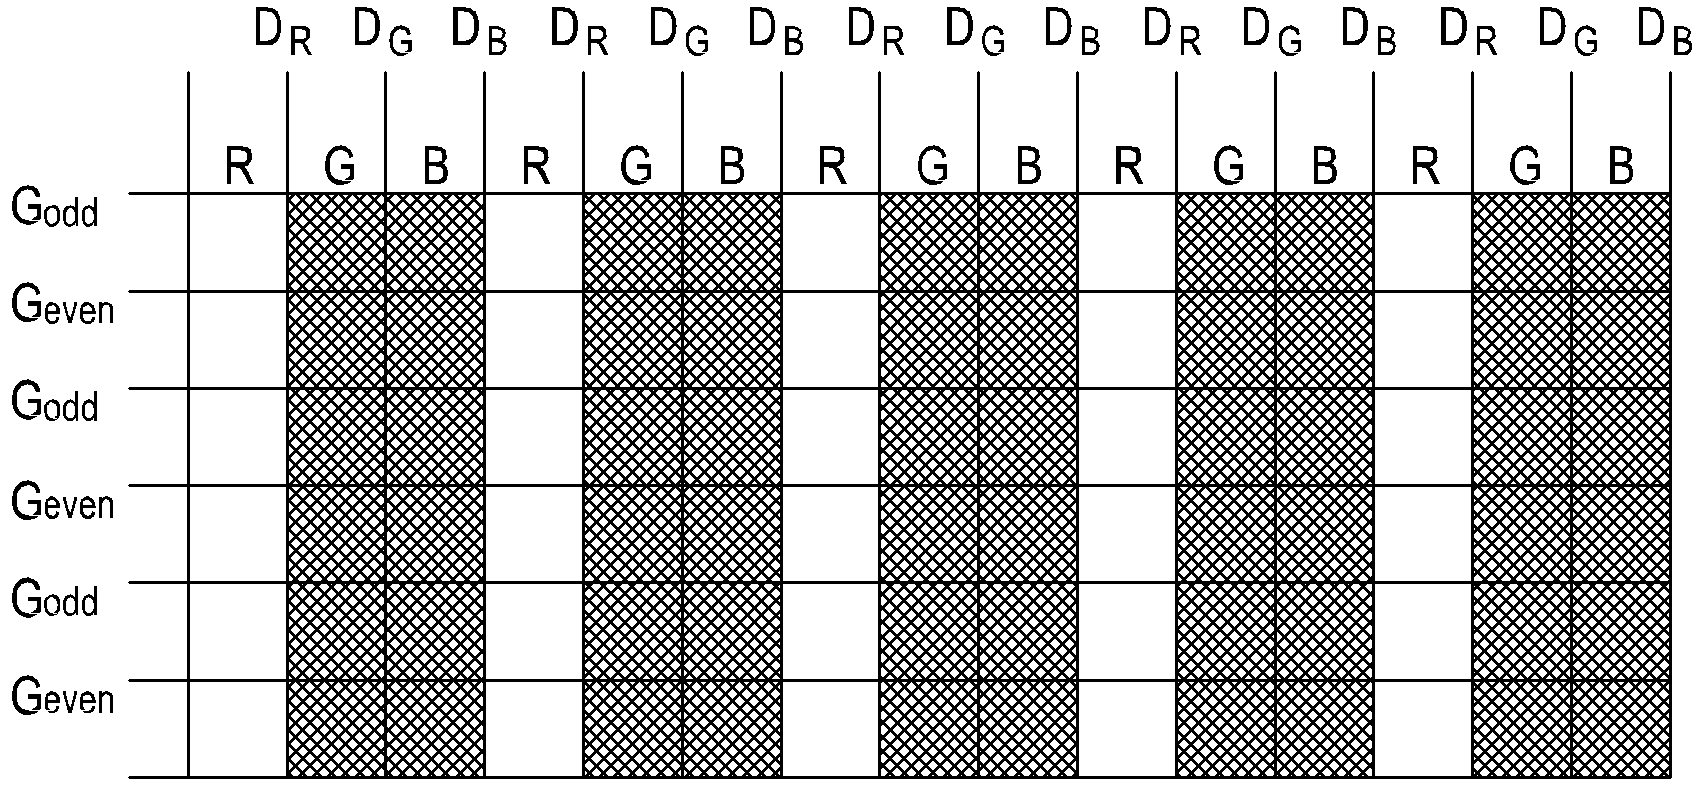 Cell test method and liquid crystal display panel for a tri-gate type pixel structure